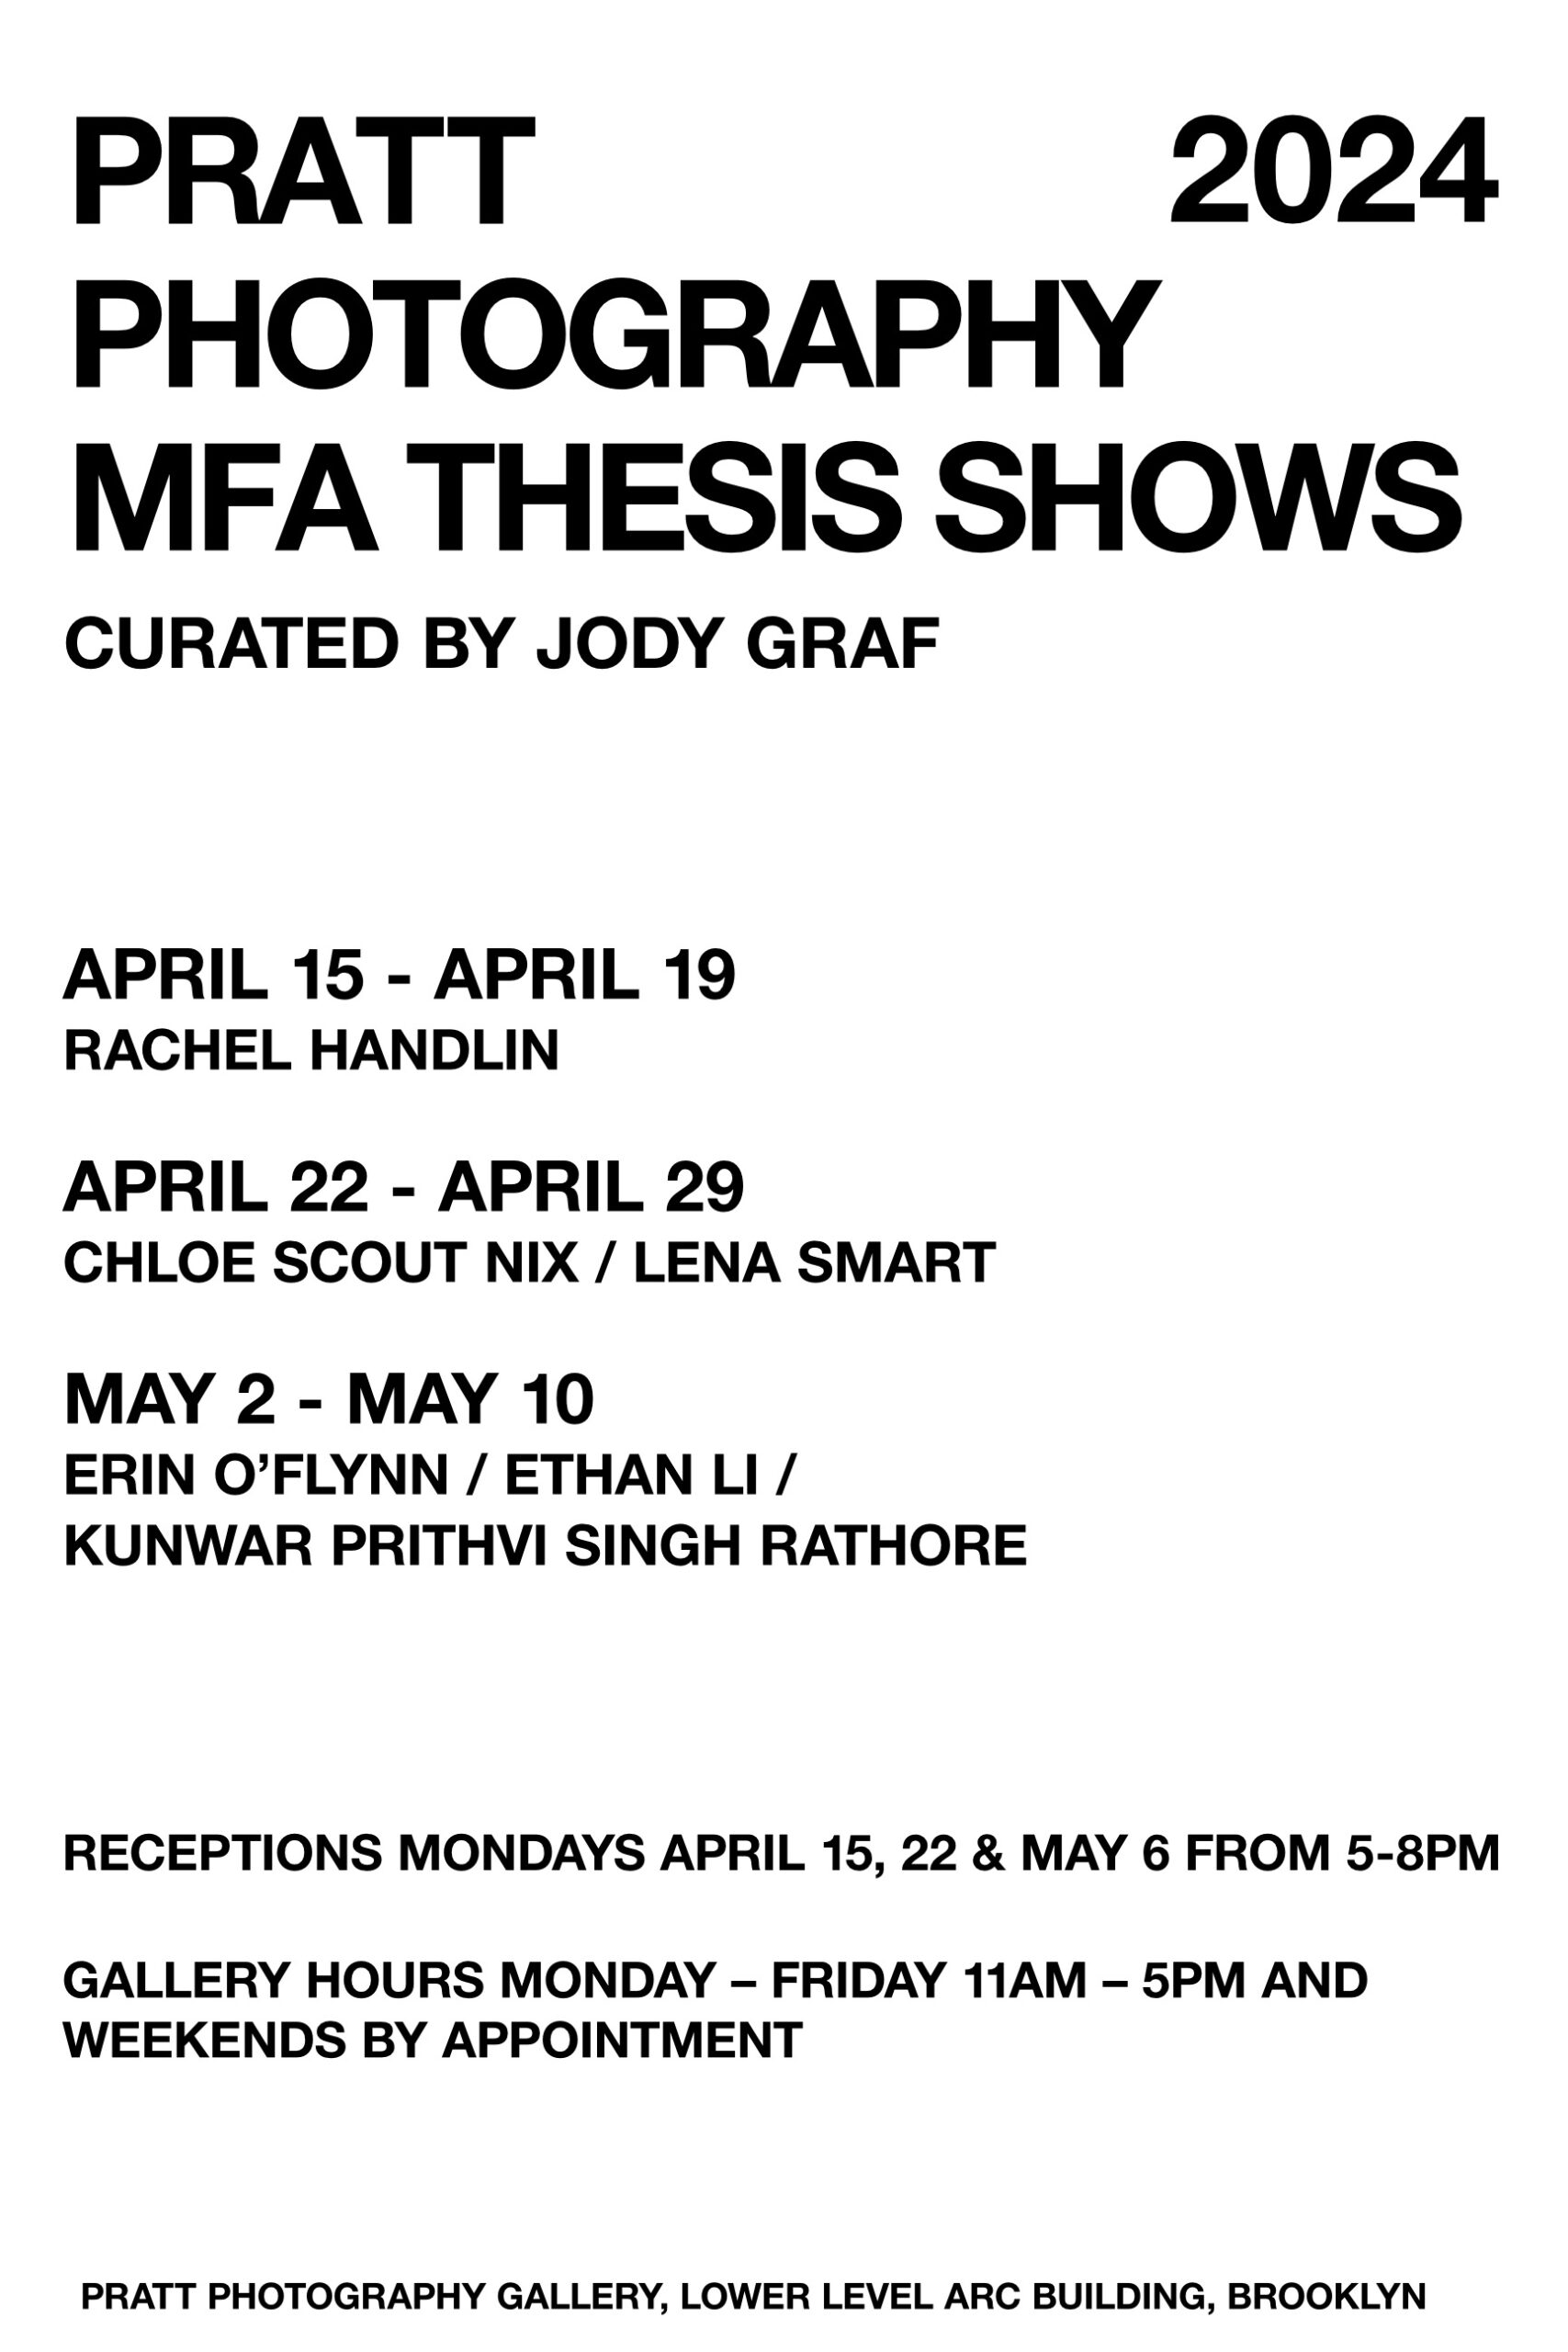 flyer for event with copy as follows: PRATT 2024 PHOTOGRAPHY MFA THESIS SHOWS CURATED BY JODY GRAF APRIL 15 - APRIL 19 RACHEL HANDLIN APRIL 22 - APRIL 29 CHLOE SCOUT NIX/LENA SMART MAY 2 - MAY 10 ERIN O’FLYNN / ETHAN LI / RECEPTIONS MONDAYS APRIL 15, 22 & MAY 6 FROM 5 - 8PM GALLERY HOURS MONDAY – FRIDAY 1AM – 5PM AND WEEKENDS BY APPOINTMENT KUNWAR PRITHVI SINGH RATHORE PRATT PHOTOGRAPHY GALLERY, LOWER LEVEL ARC BUILDING, BROOKLYN